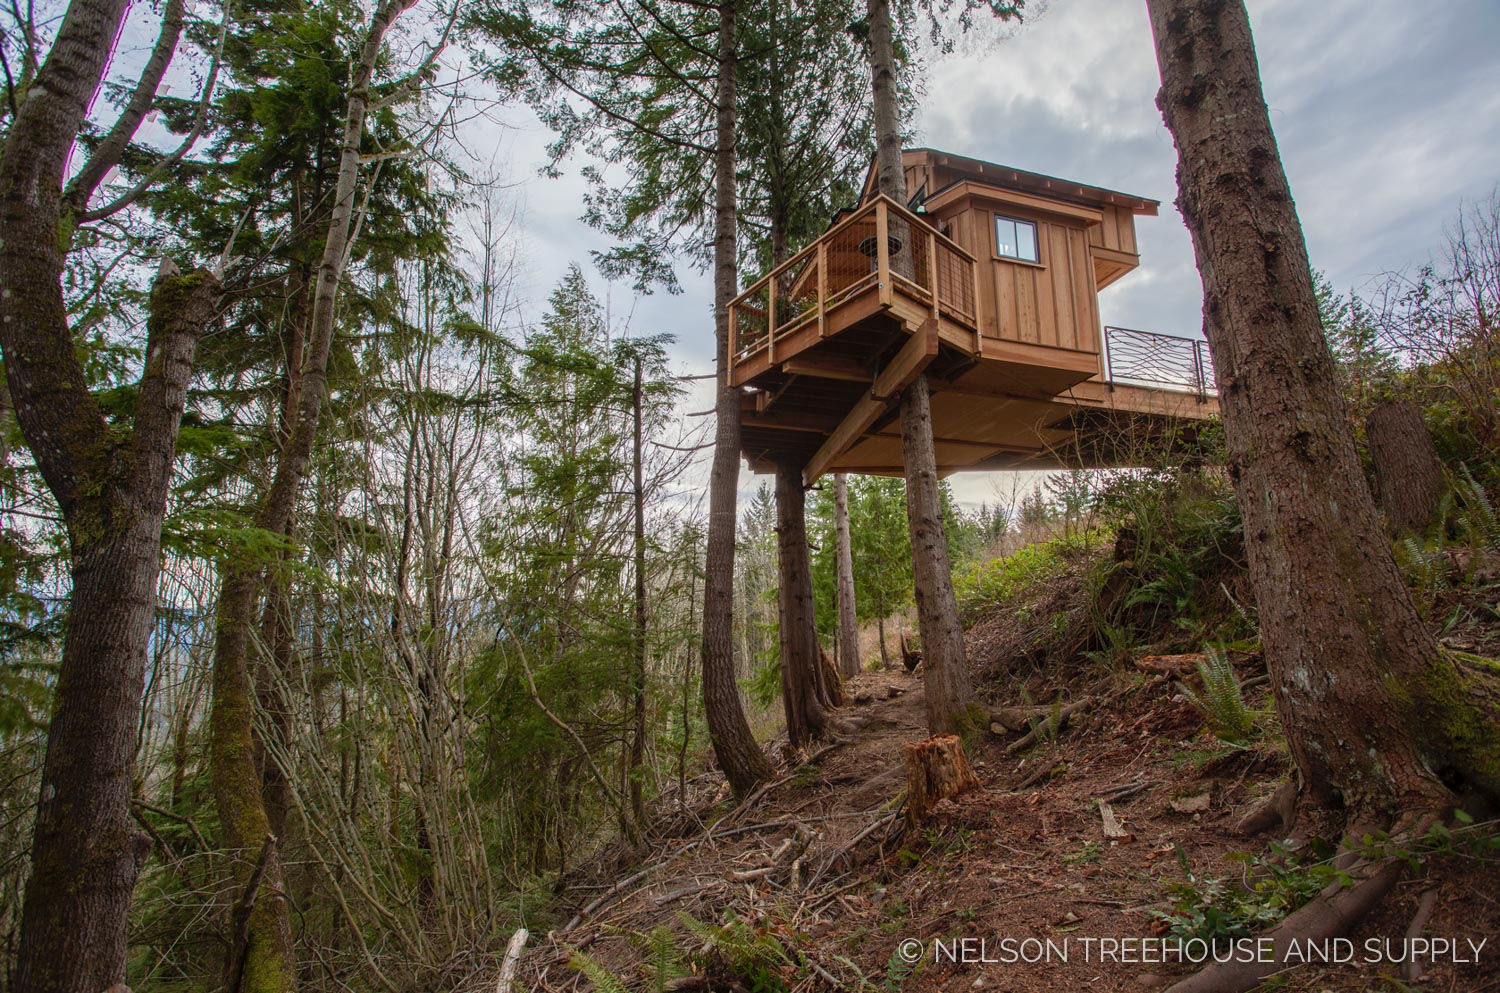  side view of the Bulldog Bungalow - nelson Treehouse 